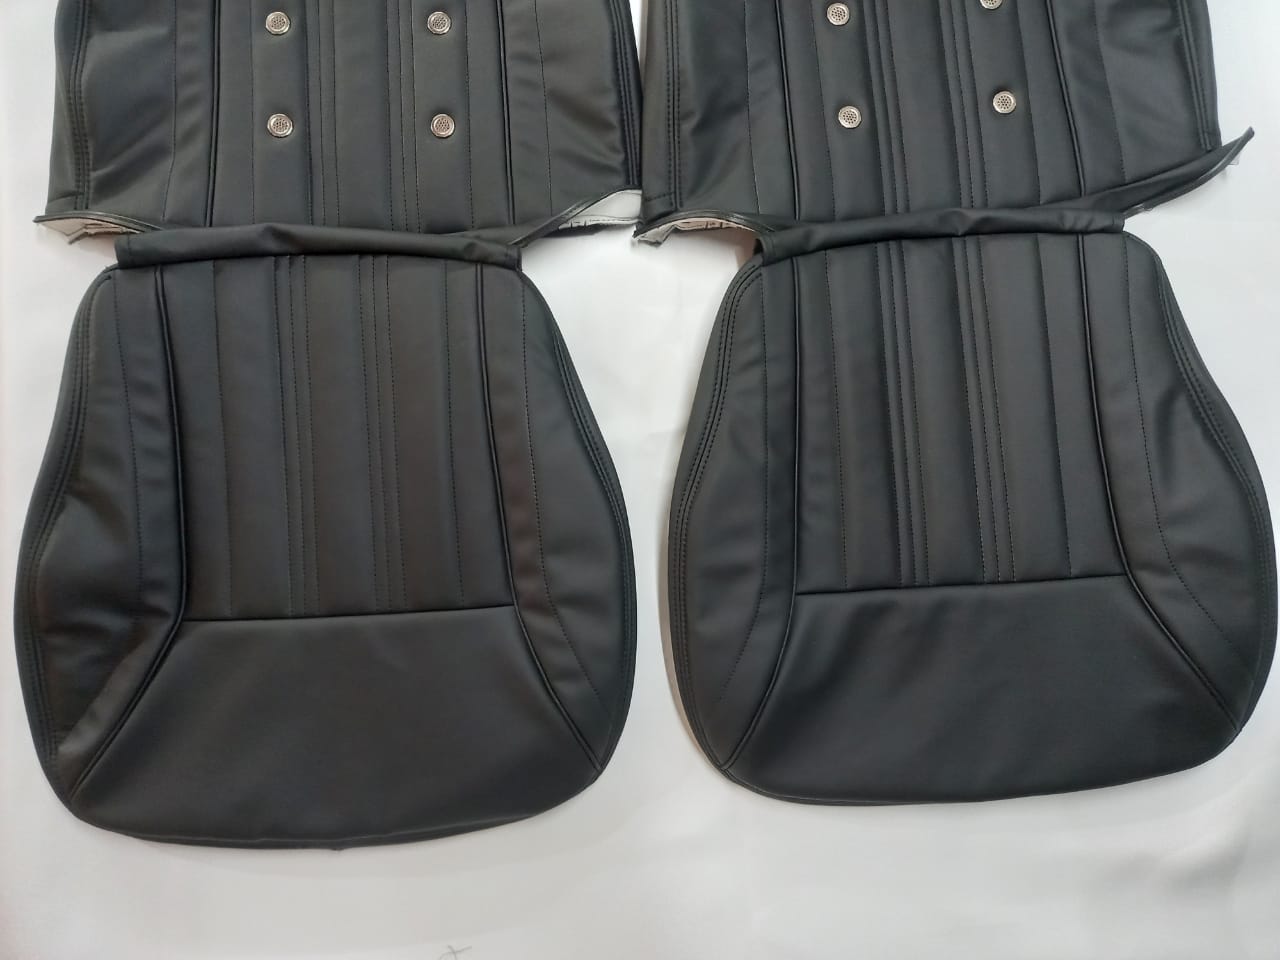 Datsun 240Z or 260Z or 280Z - (Year 1970 to 1978)  - Synthetic Leather - Seat Covers Black - Vertical Stitching